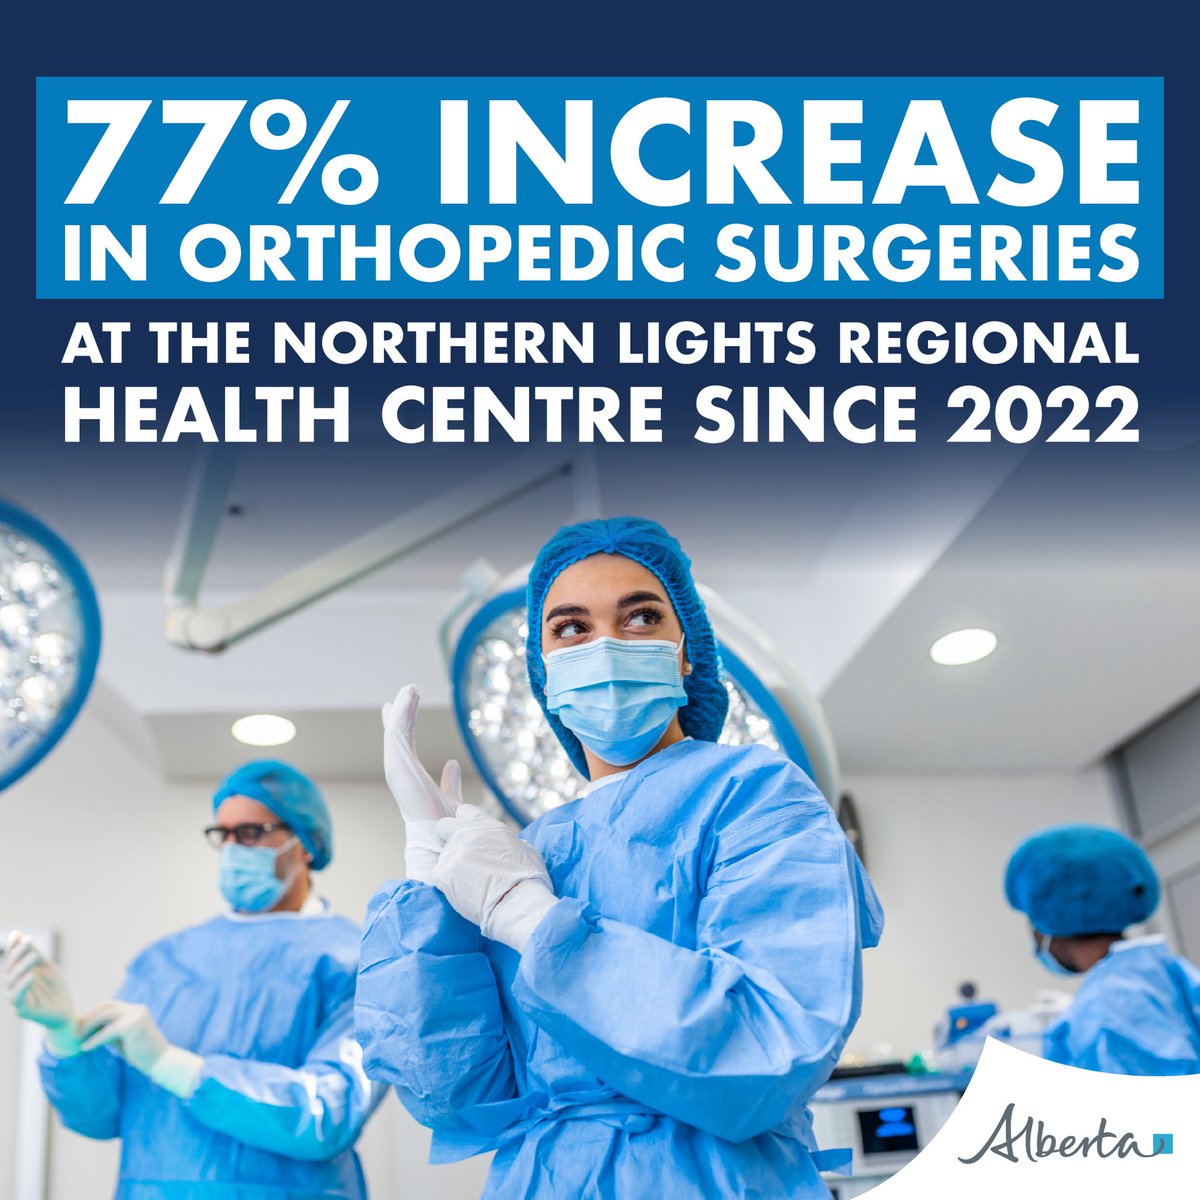 This is great news!! With the additional of two new orthopaedic surgeons in Fort McMurray’s Northern Lights Regional Health Centre, there has been an increase of 77% more surgeries done. More surgeons = more surgeries and the Government of Alberta is committed to increasing